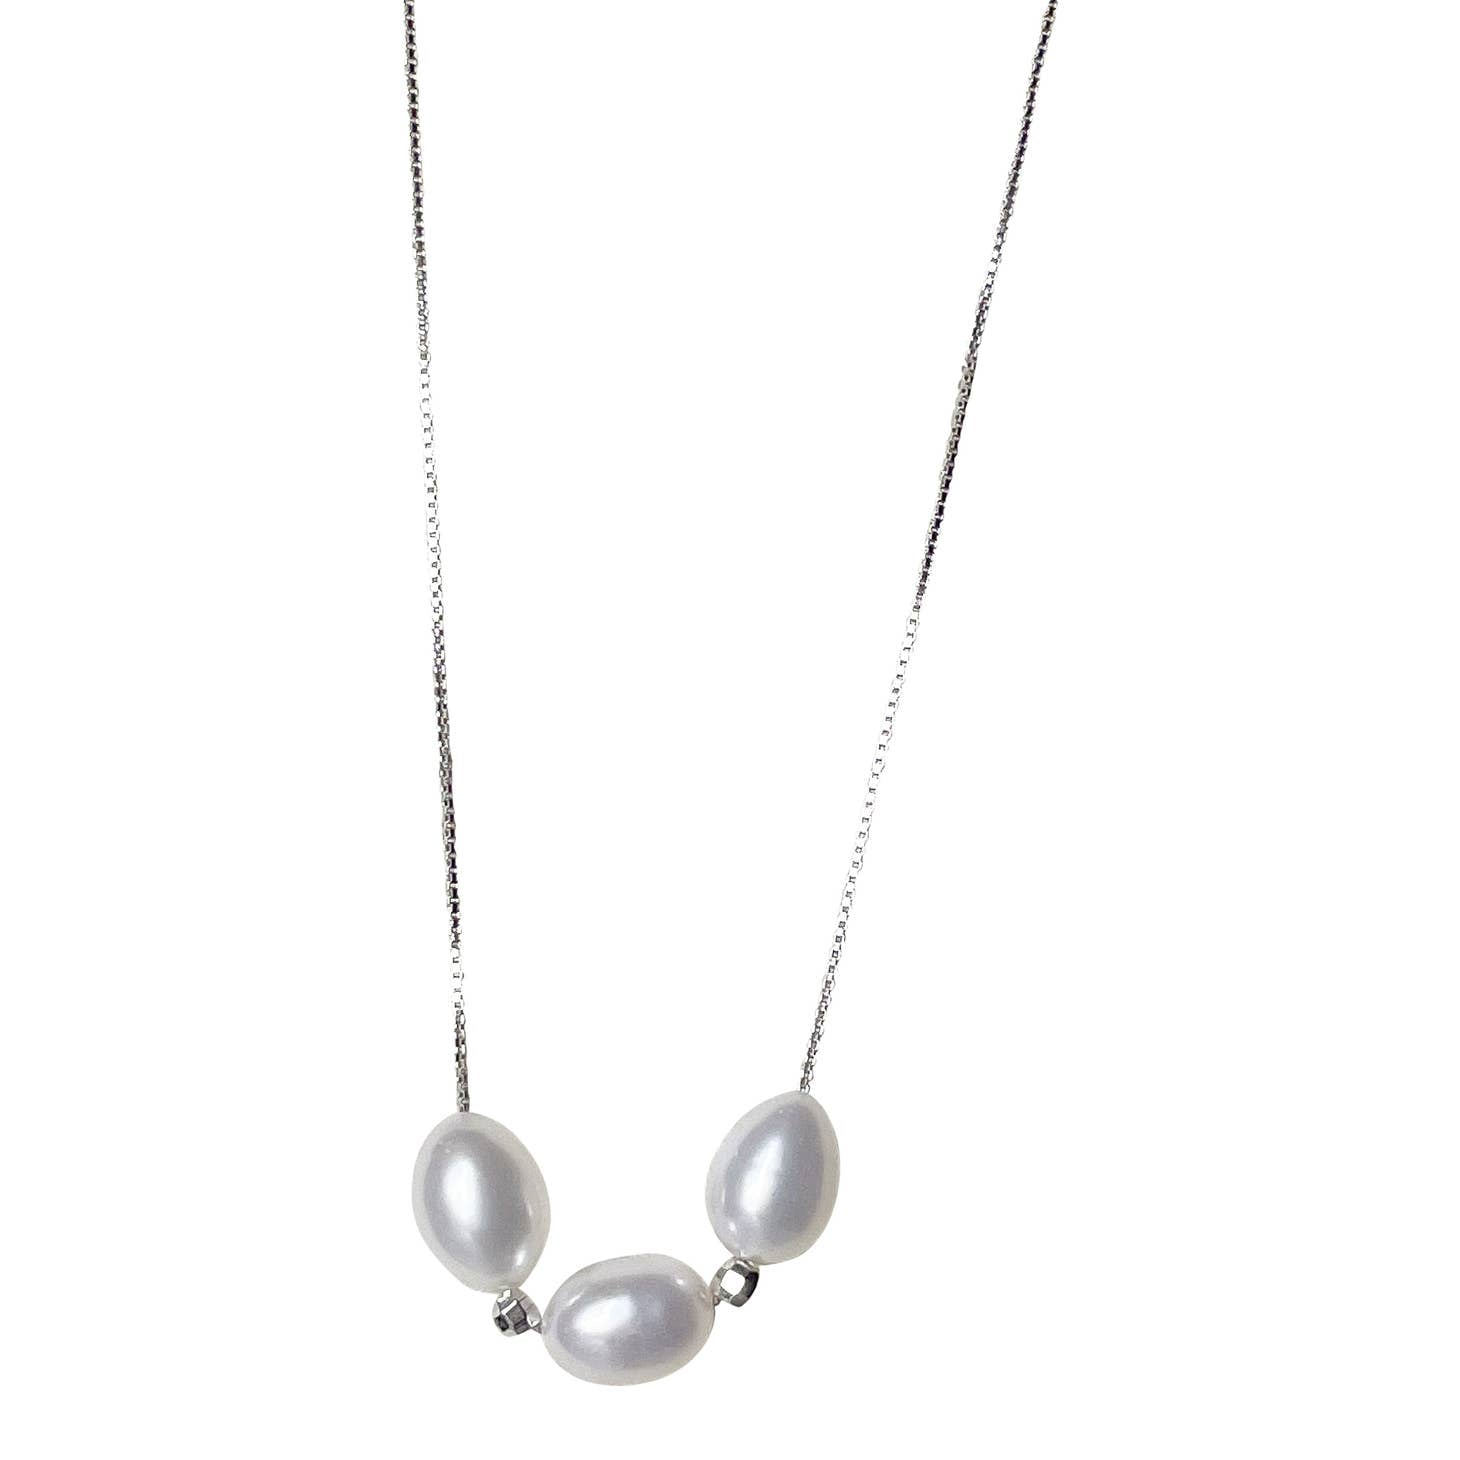 3 Freshwater Pearl/Spacers Necklace